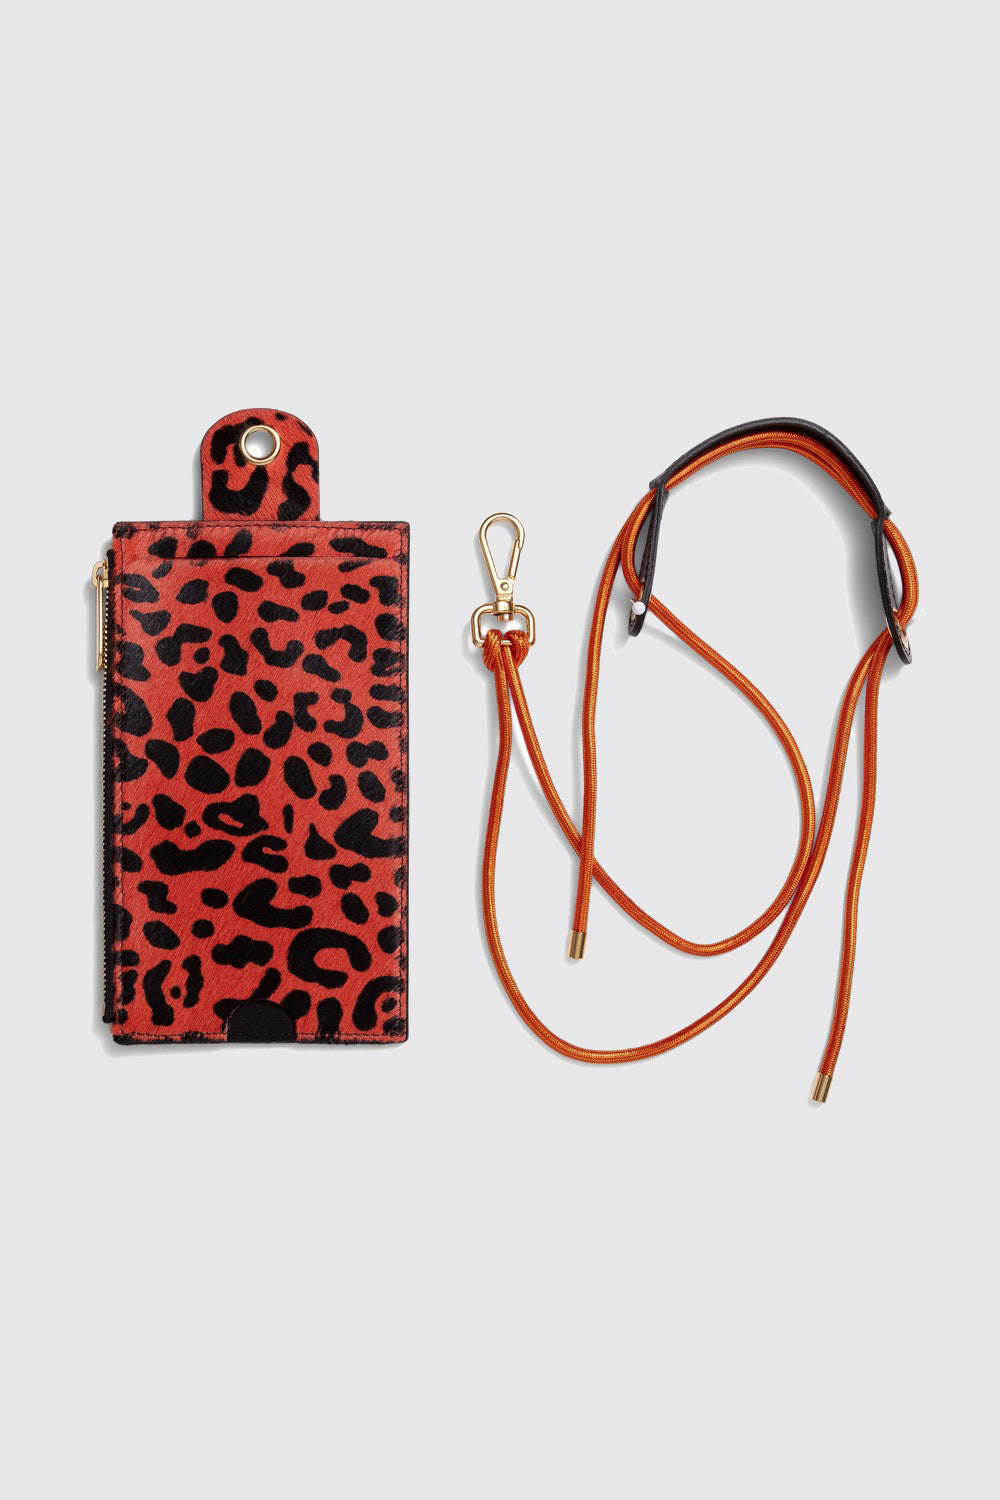 The Minis - Large neck wallet in orange Leopard printed leather